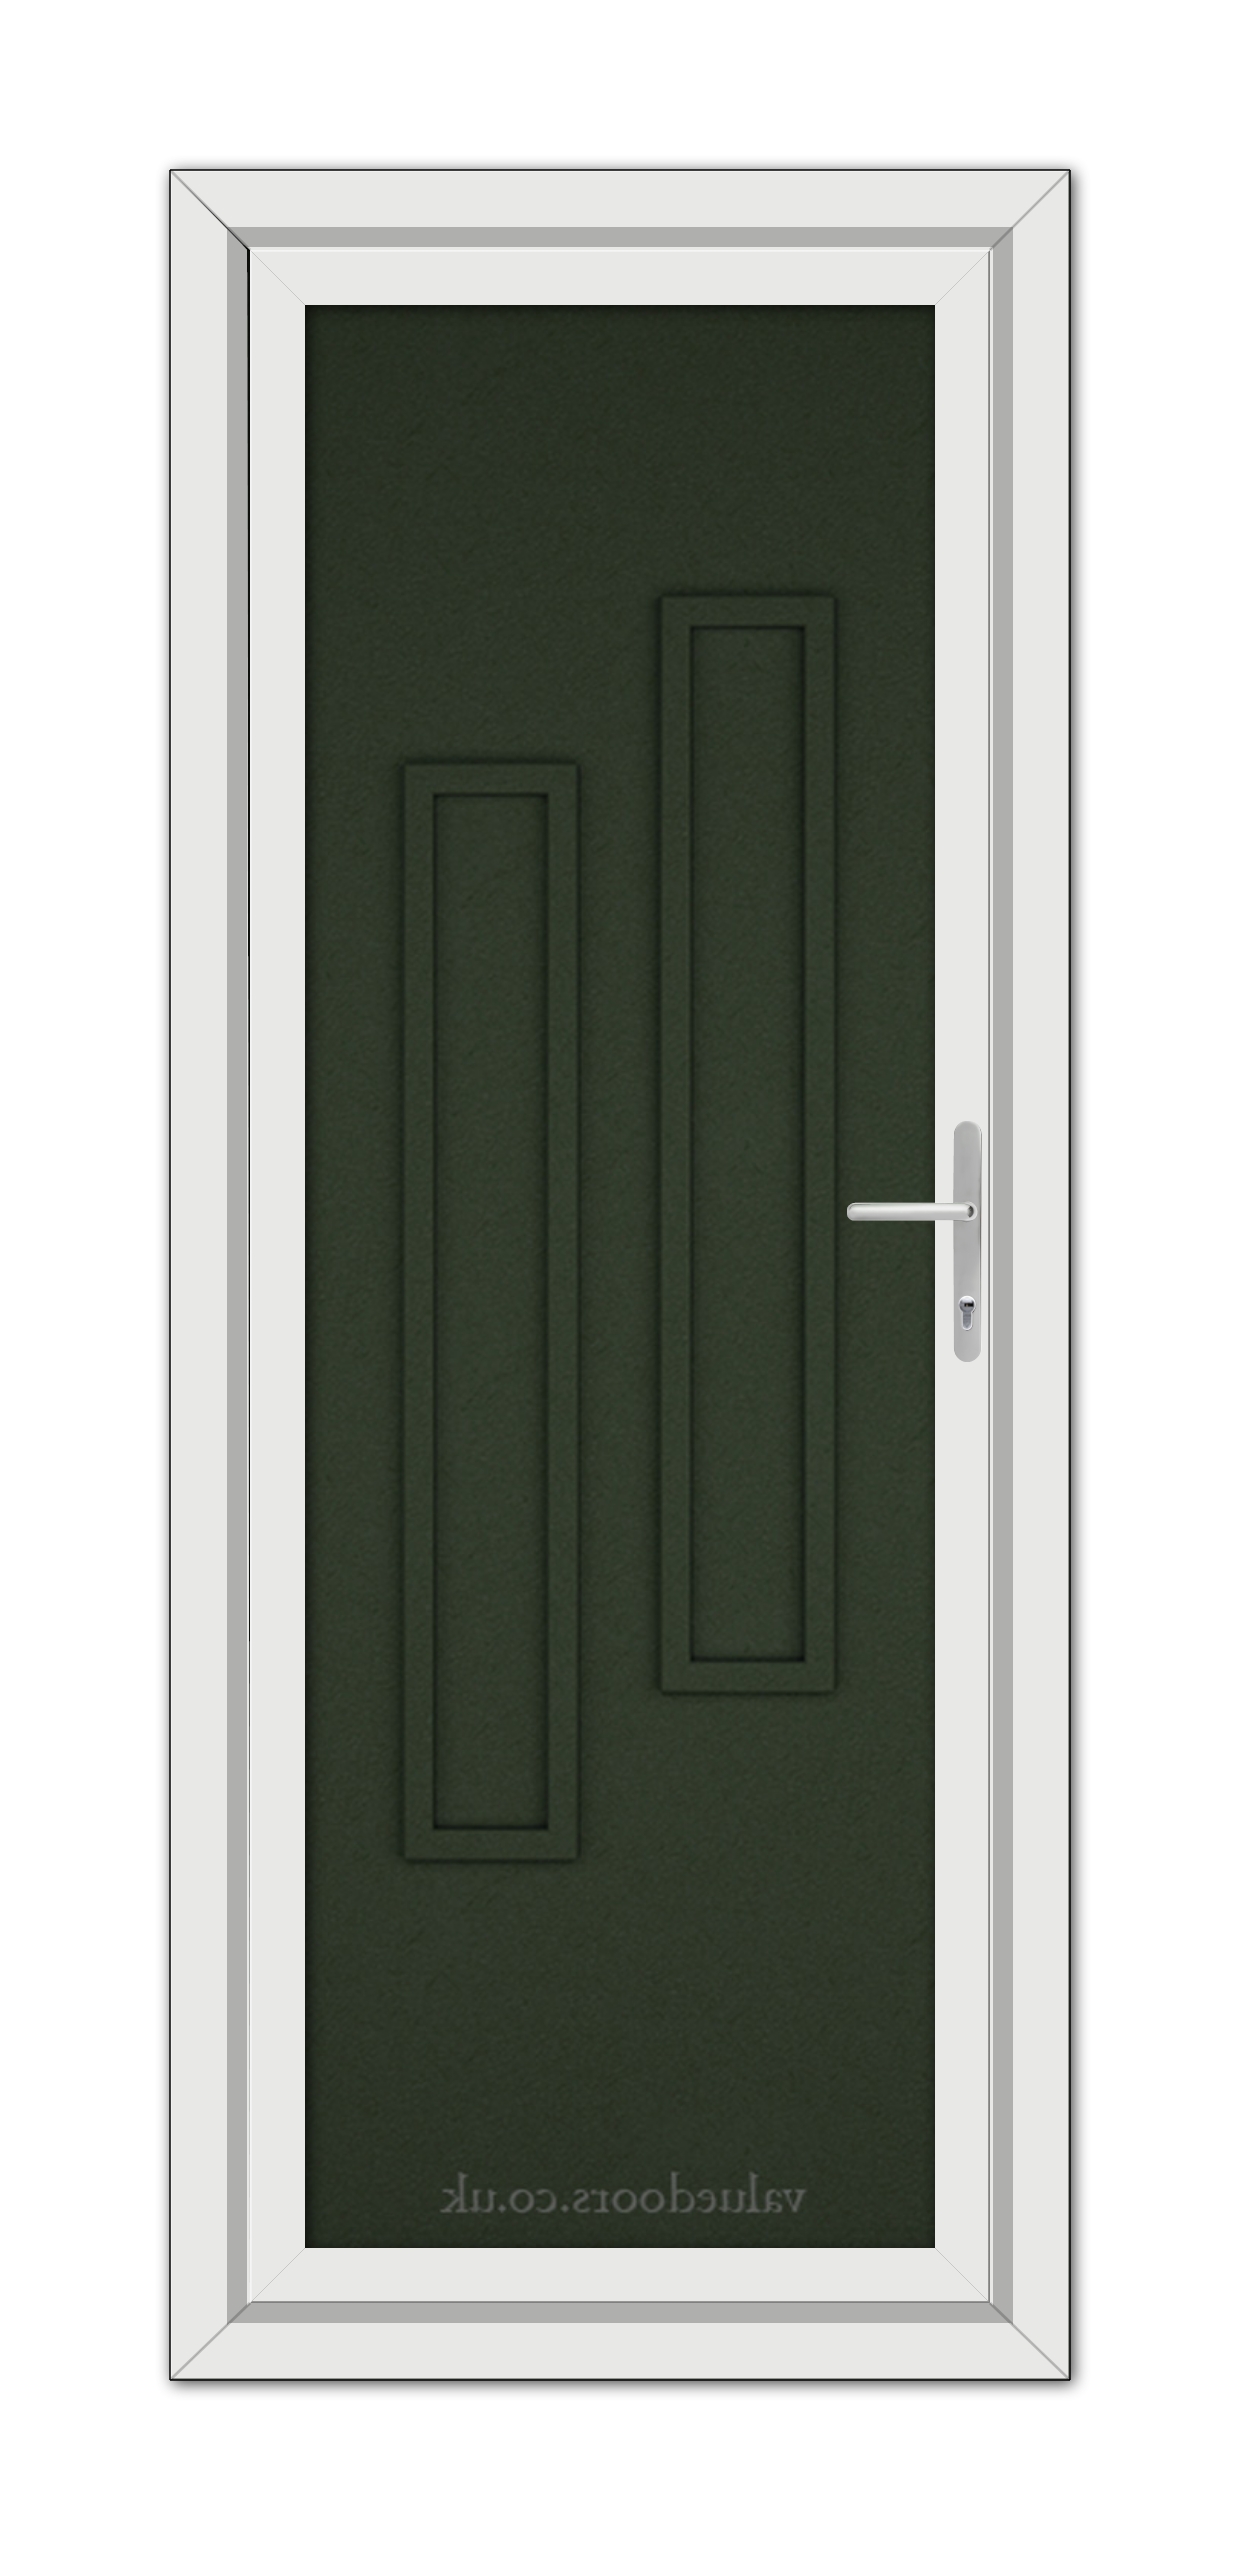 A vertical image of a Green Modern 5082 Solid uPVC Door with silver handle, set within a white frame, viewed from the front.